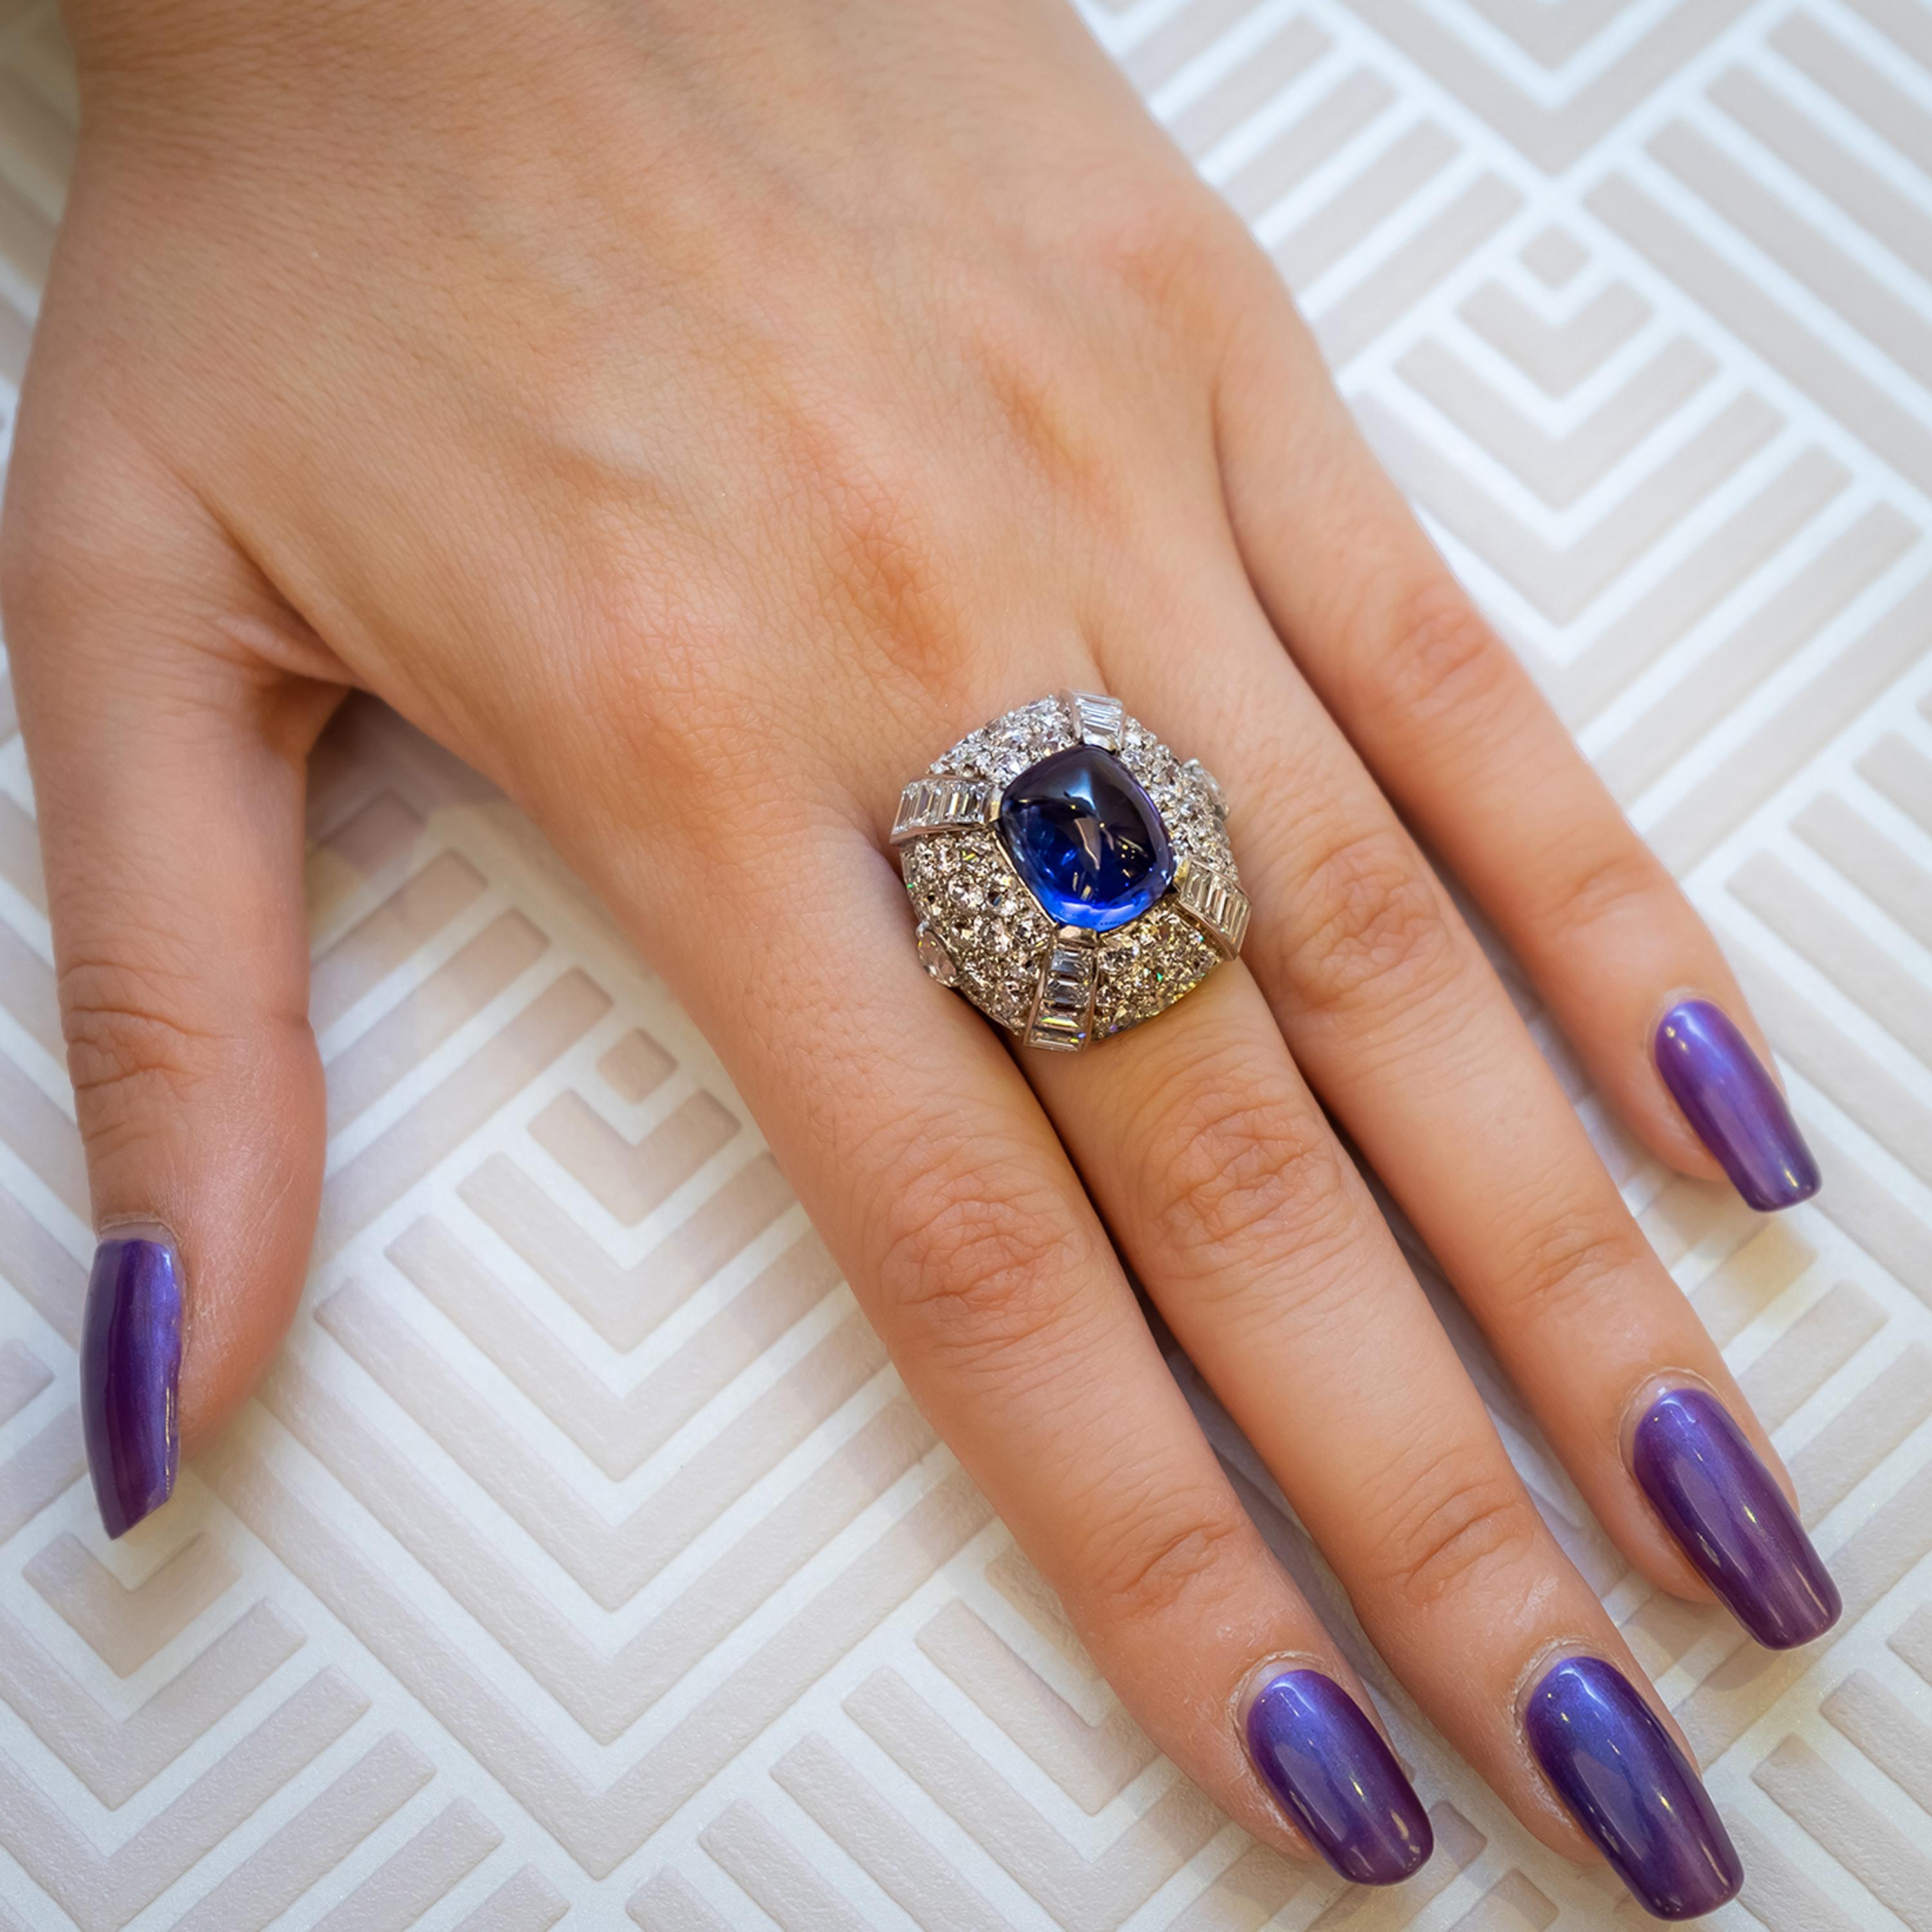 A vintage sapphire and diamond bombé ring, set with an unheated sugar-loaf cabochon sapphire, weighing 9.10ct, in the centre, with pavé set round brilliant-cut diamonds and channel set baguette-cut diamonds in the surround, with an estimated total